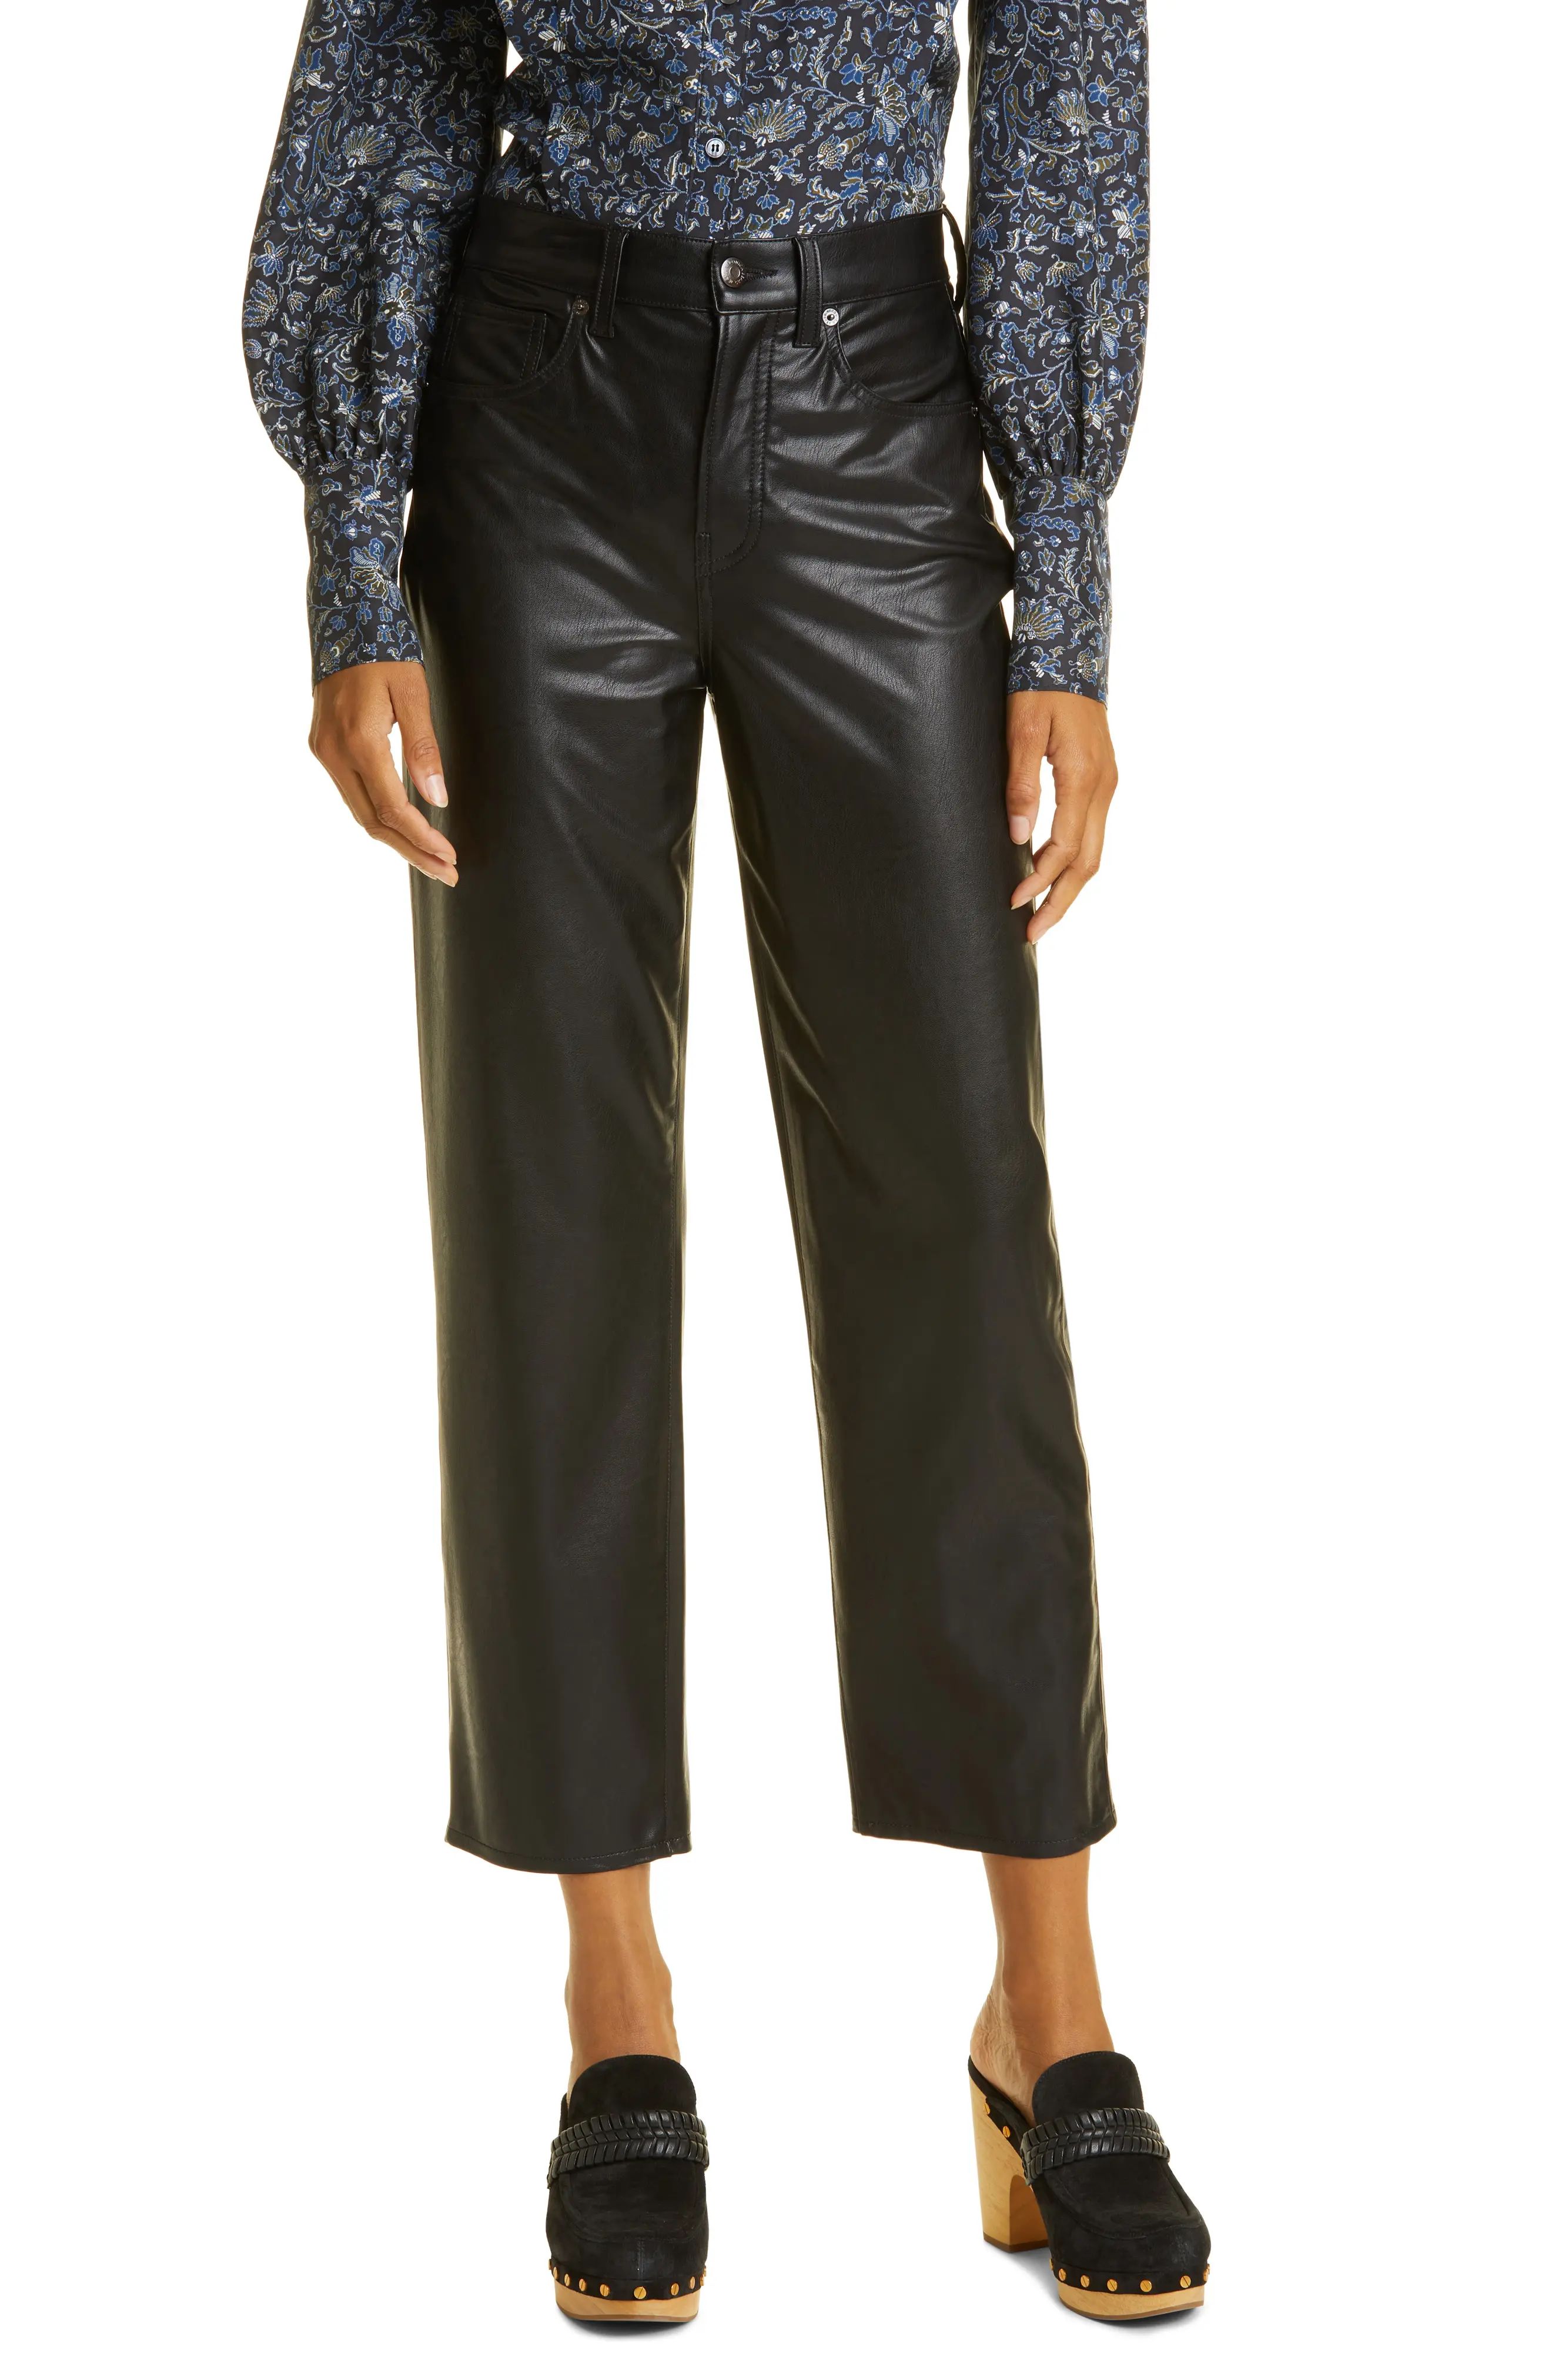 Veronica Beard Ryleigh High Waist Slim Straight Faux Leather Pants, Size 24 in Black at Nordstrom | Nordstrom